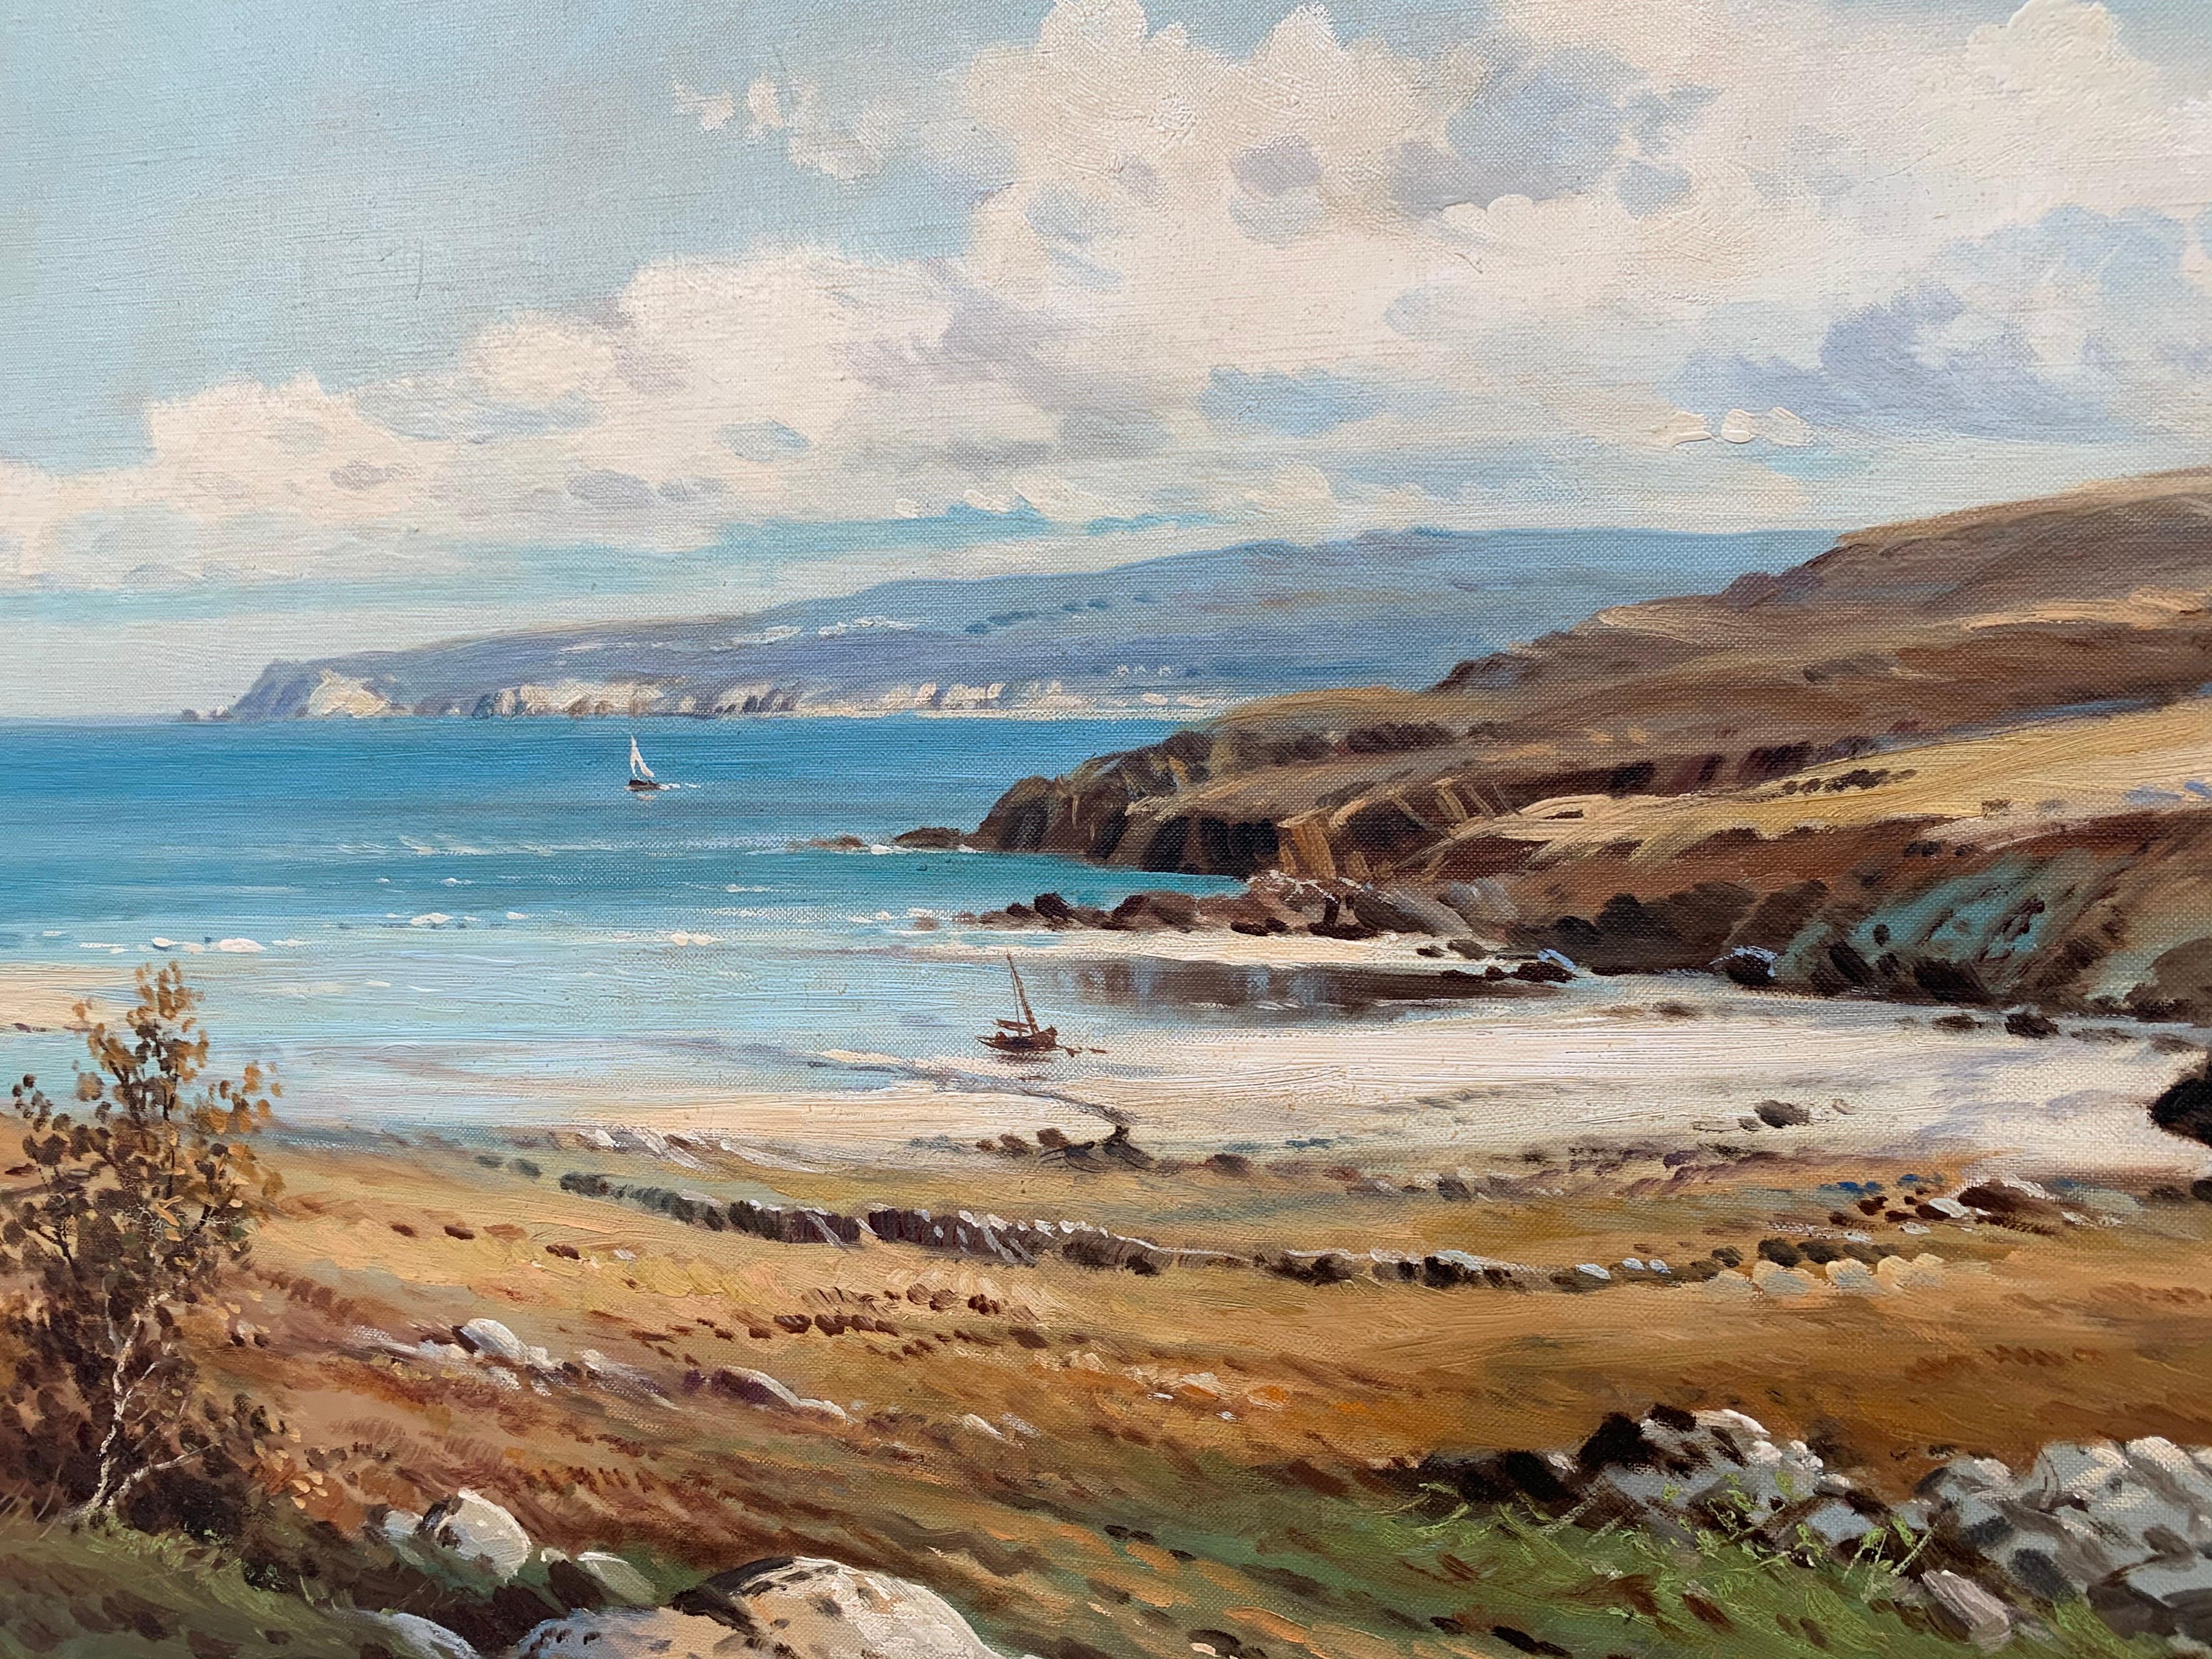 Original Oil Painting of the North Coast of Scotland by British Artist, William McGregor. Entitled Off the Sutherland Coast. Provenance John Mathieson Edinburgh. 

Art measures 30 x 20 inches
Frame measures 35 x 25 inches 
